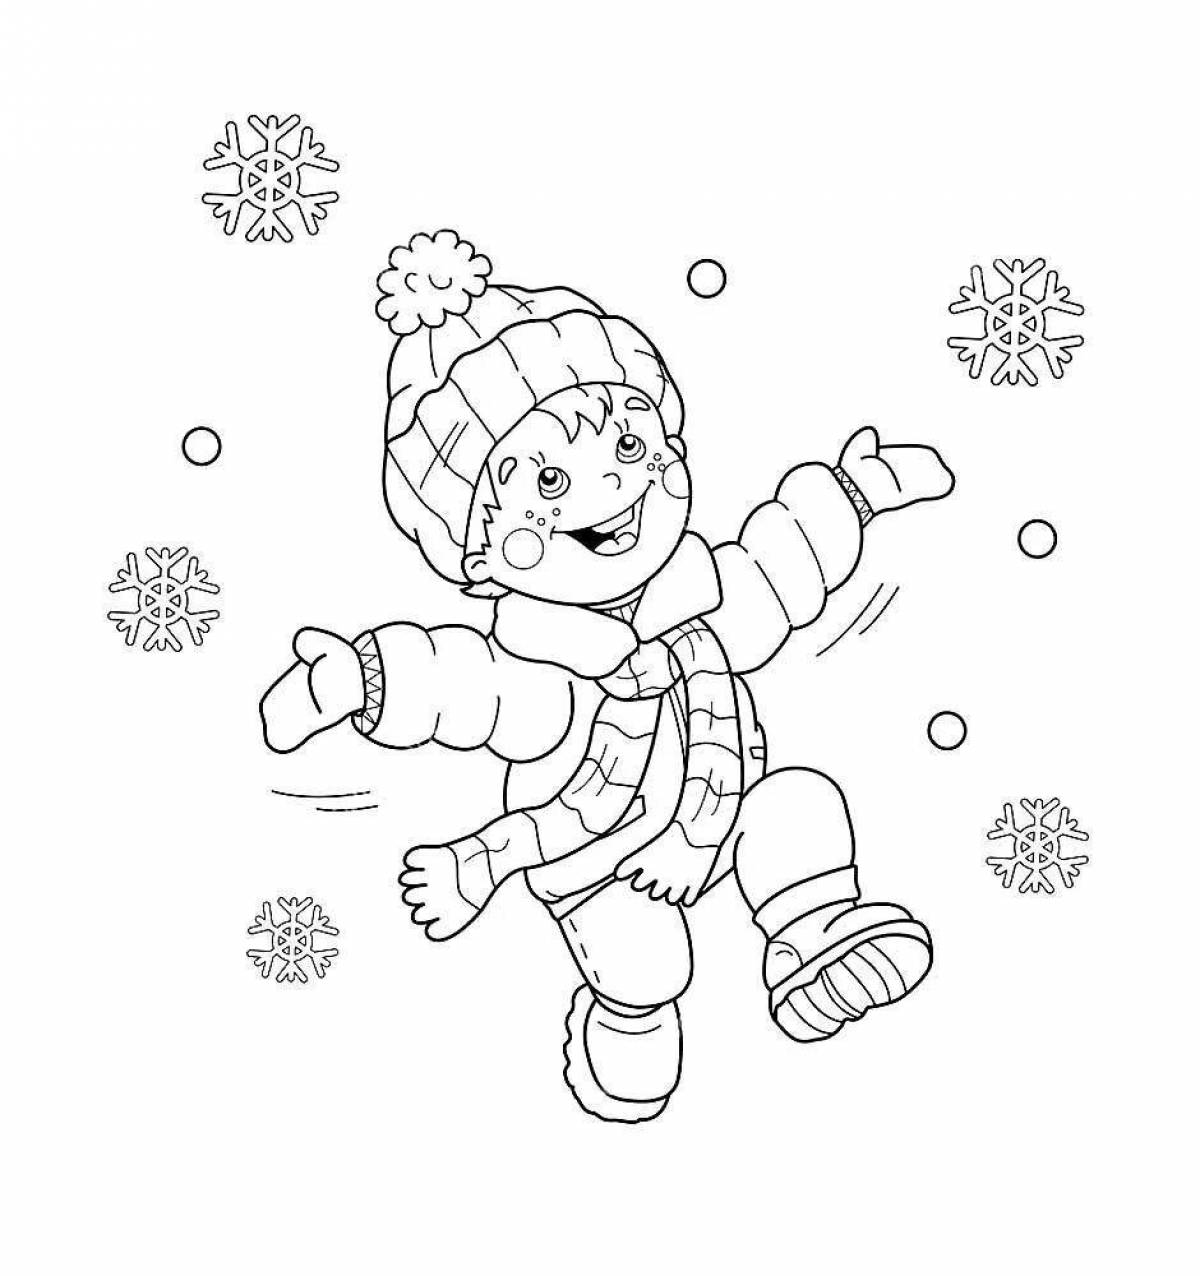 Great snowing coloring book for kids